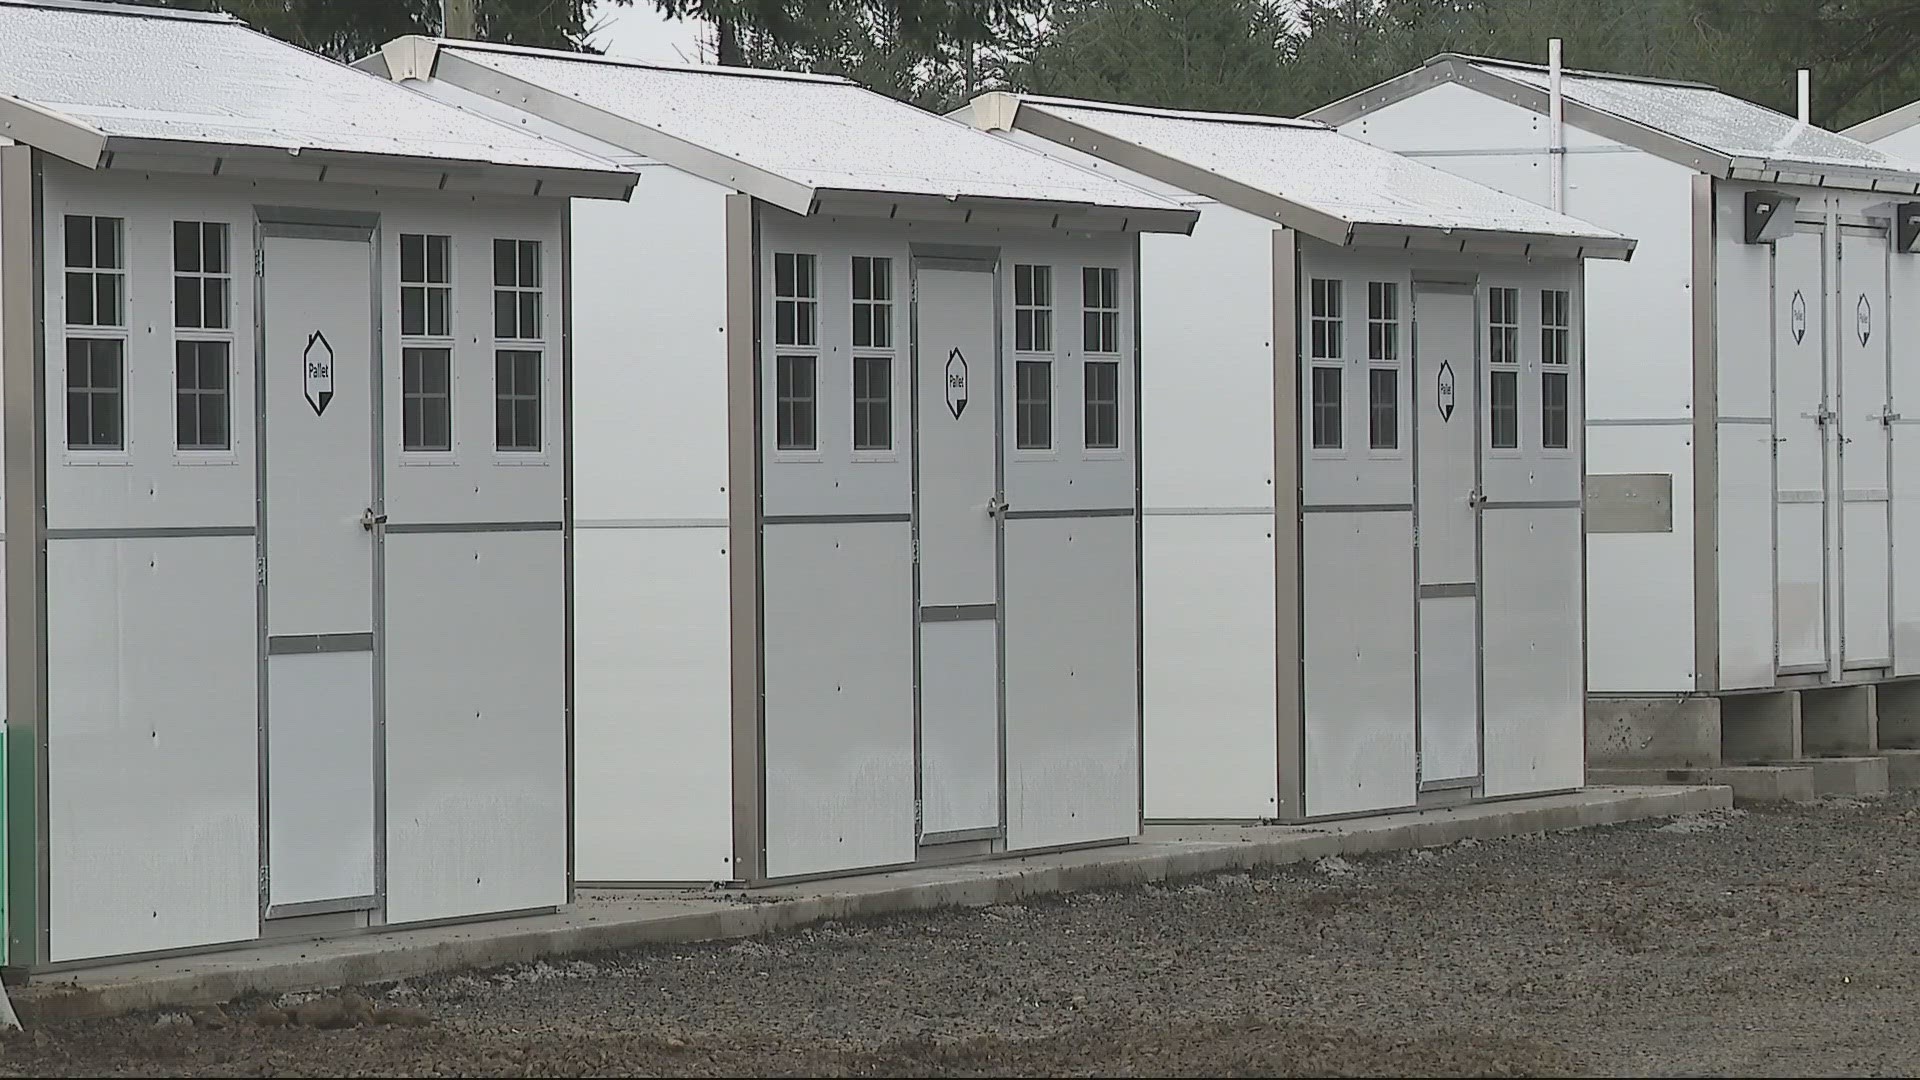 The Confederated Tribes of Grand Ronde is working to support homeless tribal members with two new tiny shelter villages.